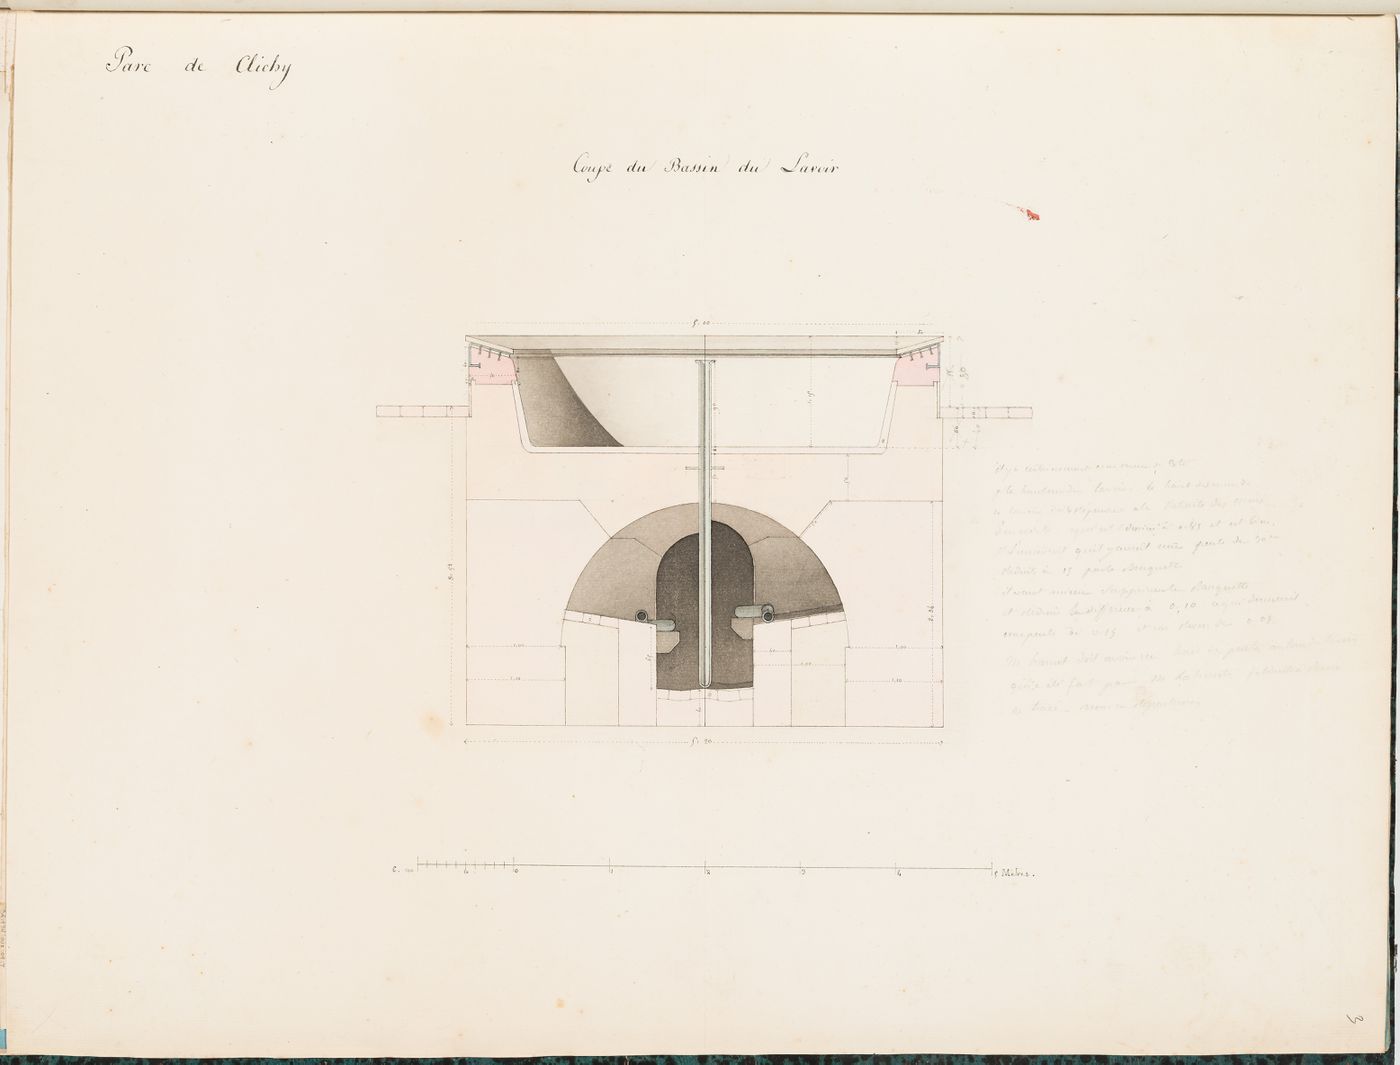 Cross section for a washhouse basin and its waterworks, Parc de Clichy